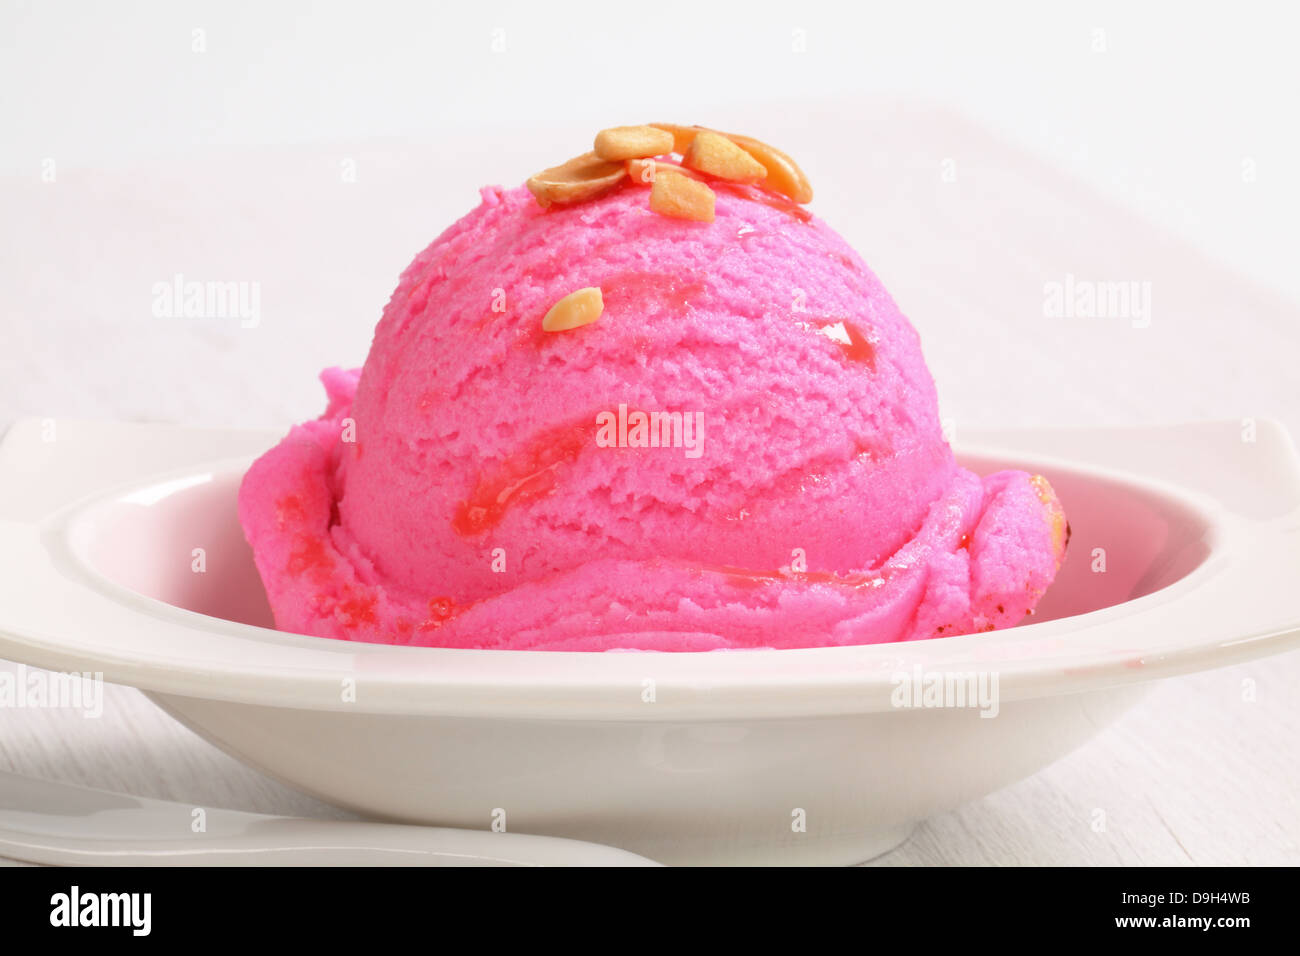 Scoop of pink ice cream on a dessert plate Stock Photo